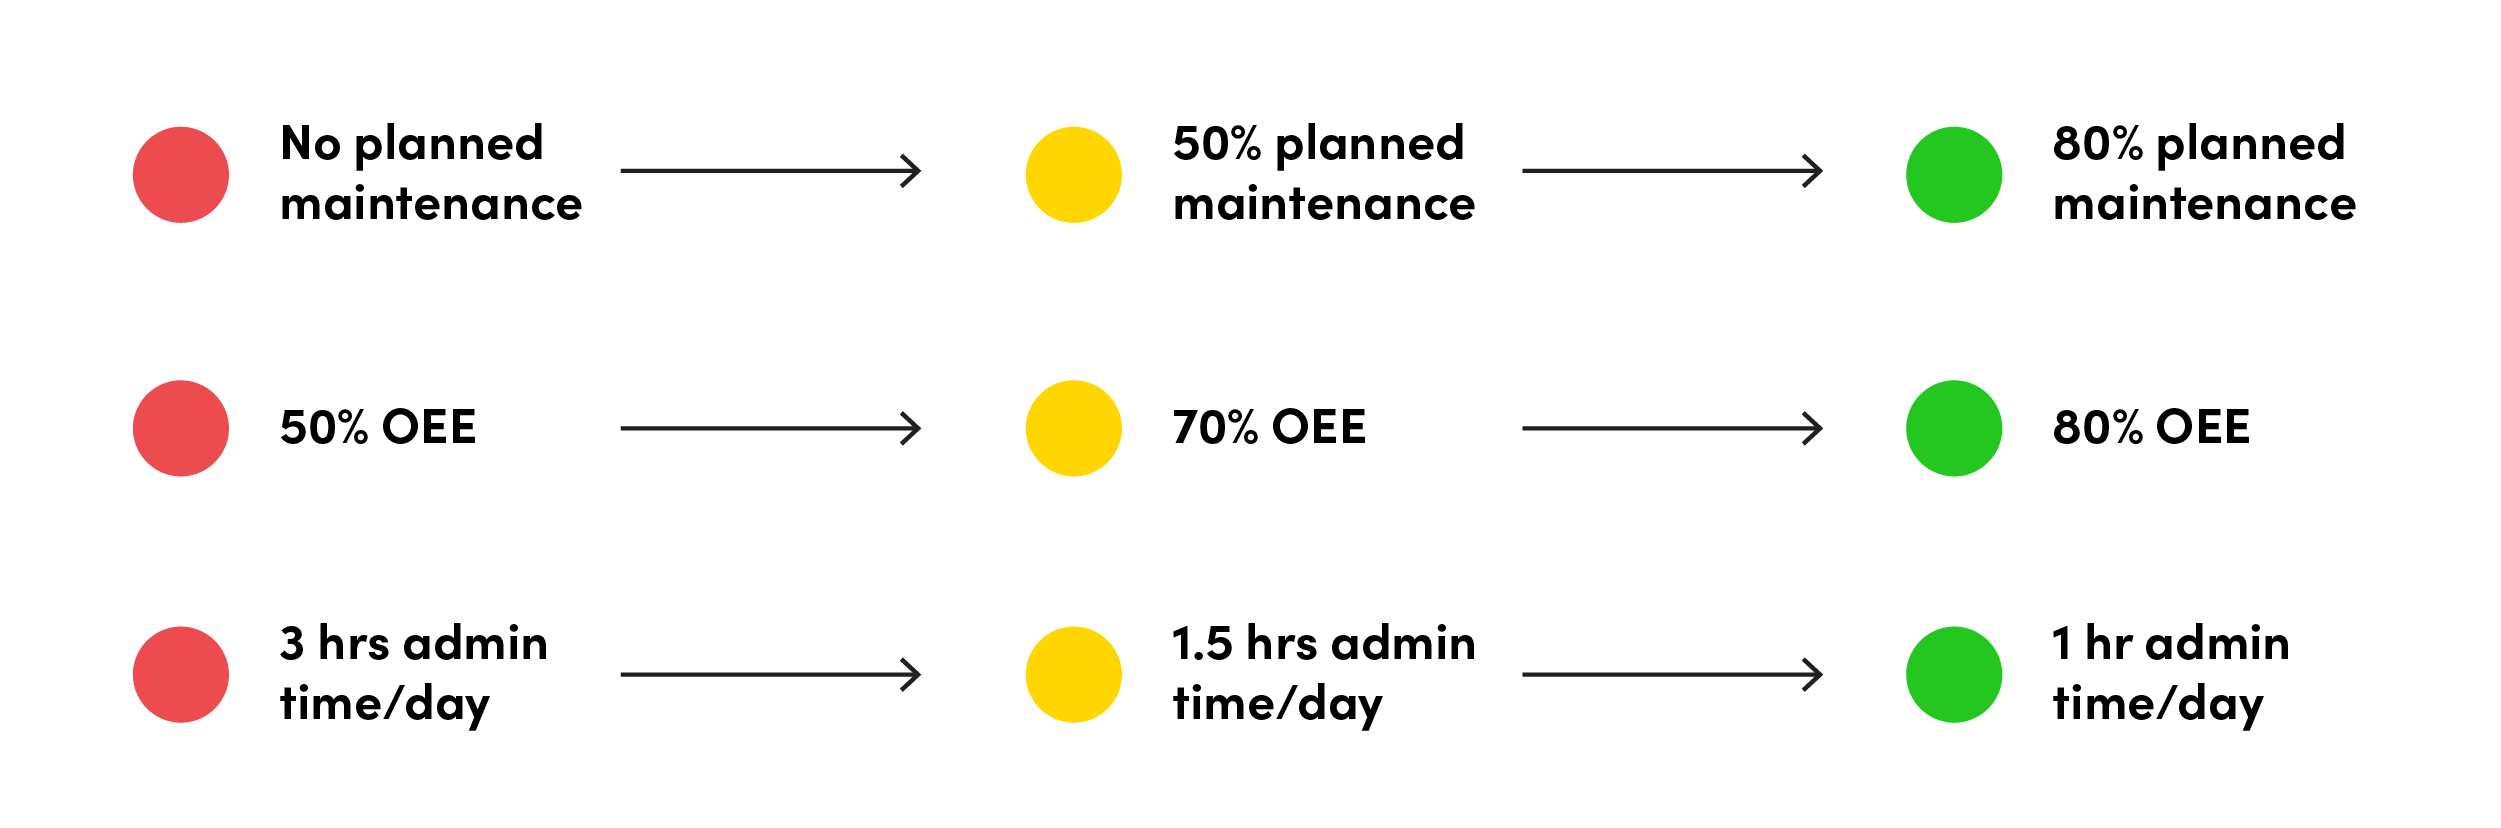 Examples of going from zero,50 to 80% improvement in maintenance